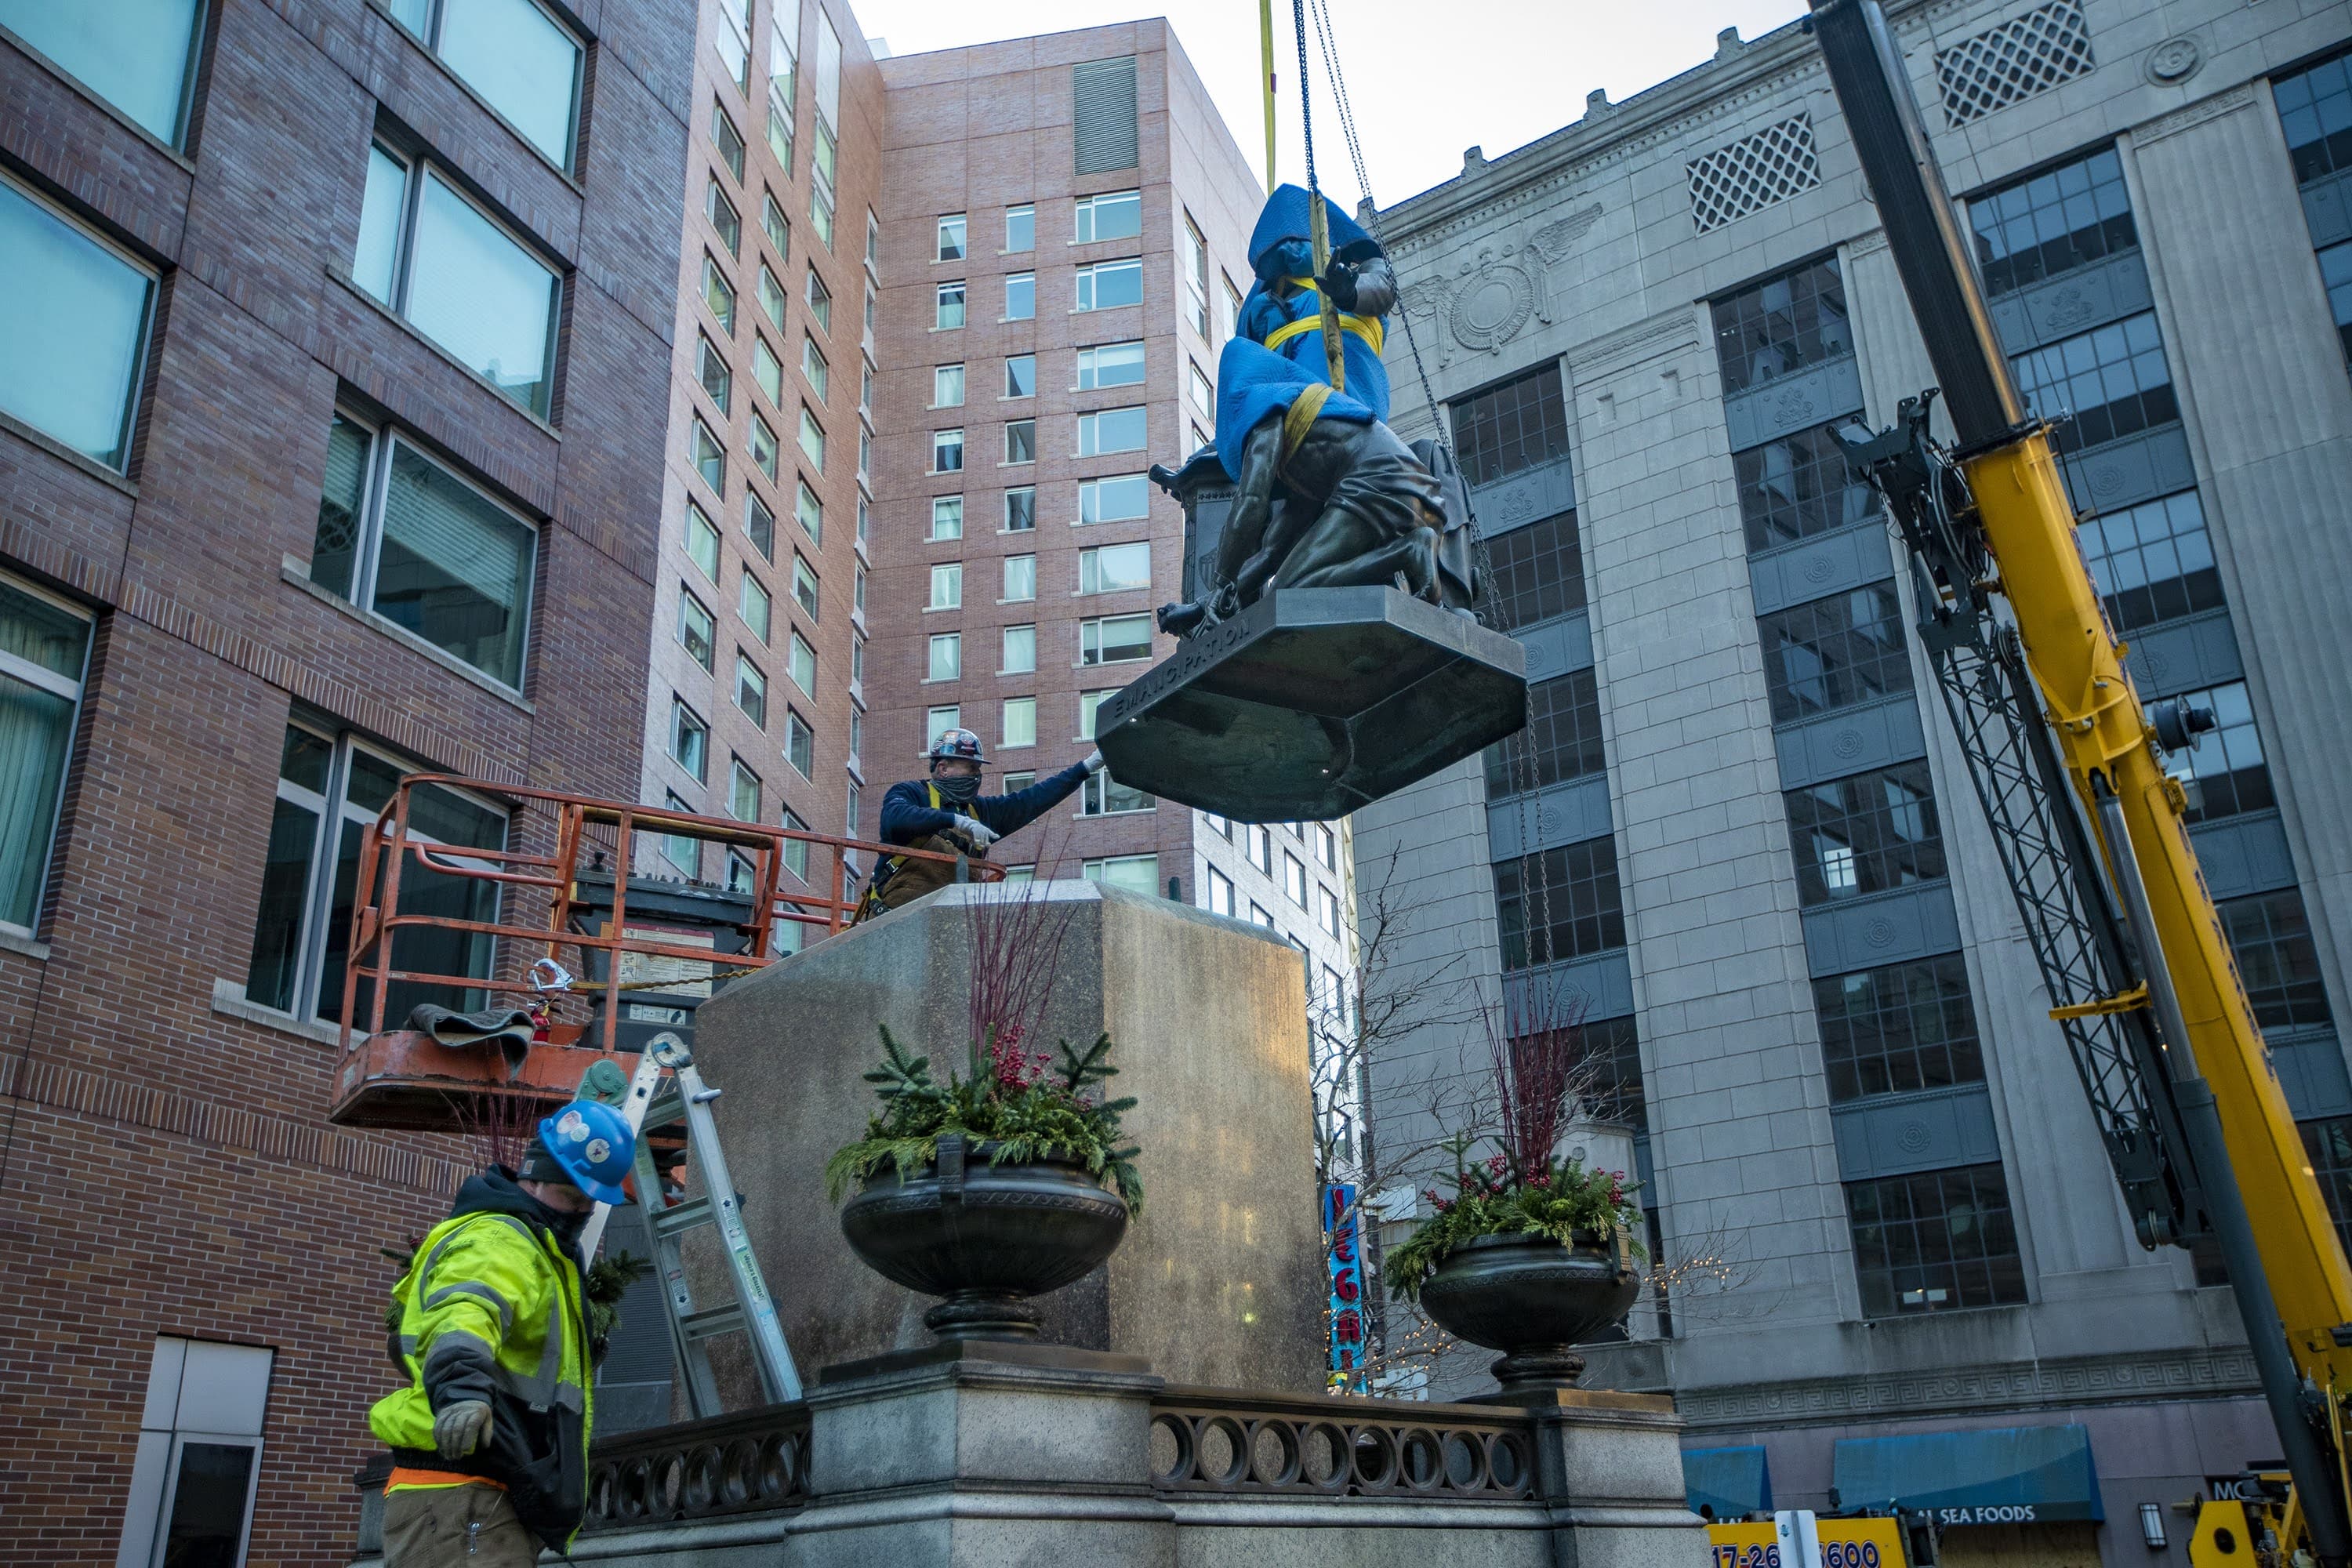 Workers remove the “Emancipation Group” statue from its pedestal in Park Square. (Jesse Costa/WBUR)